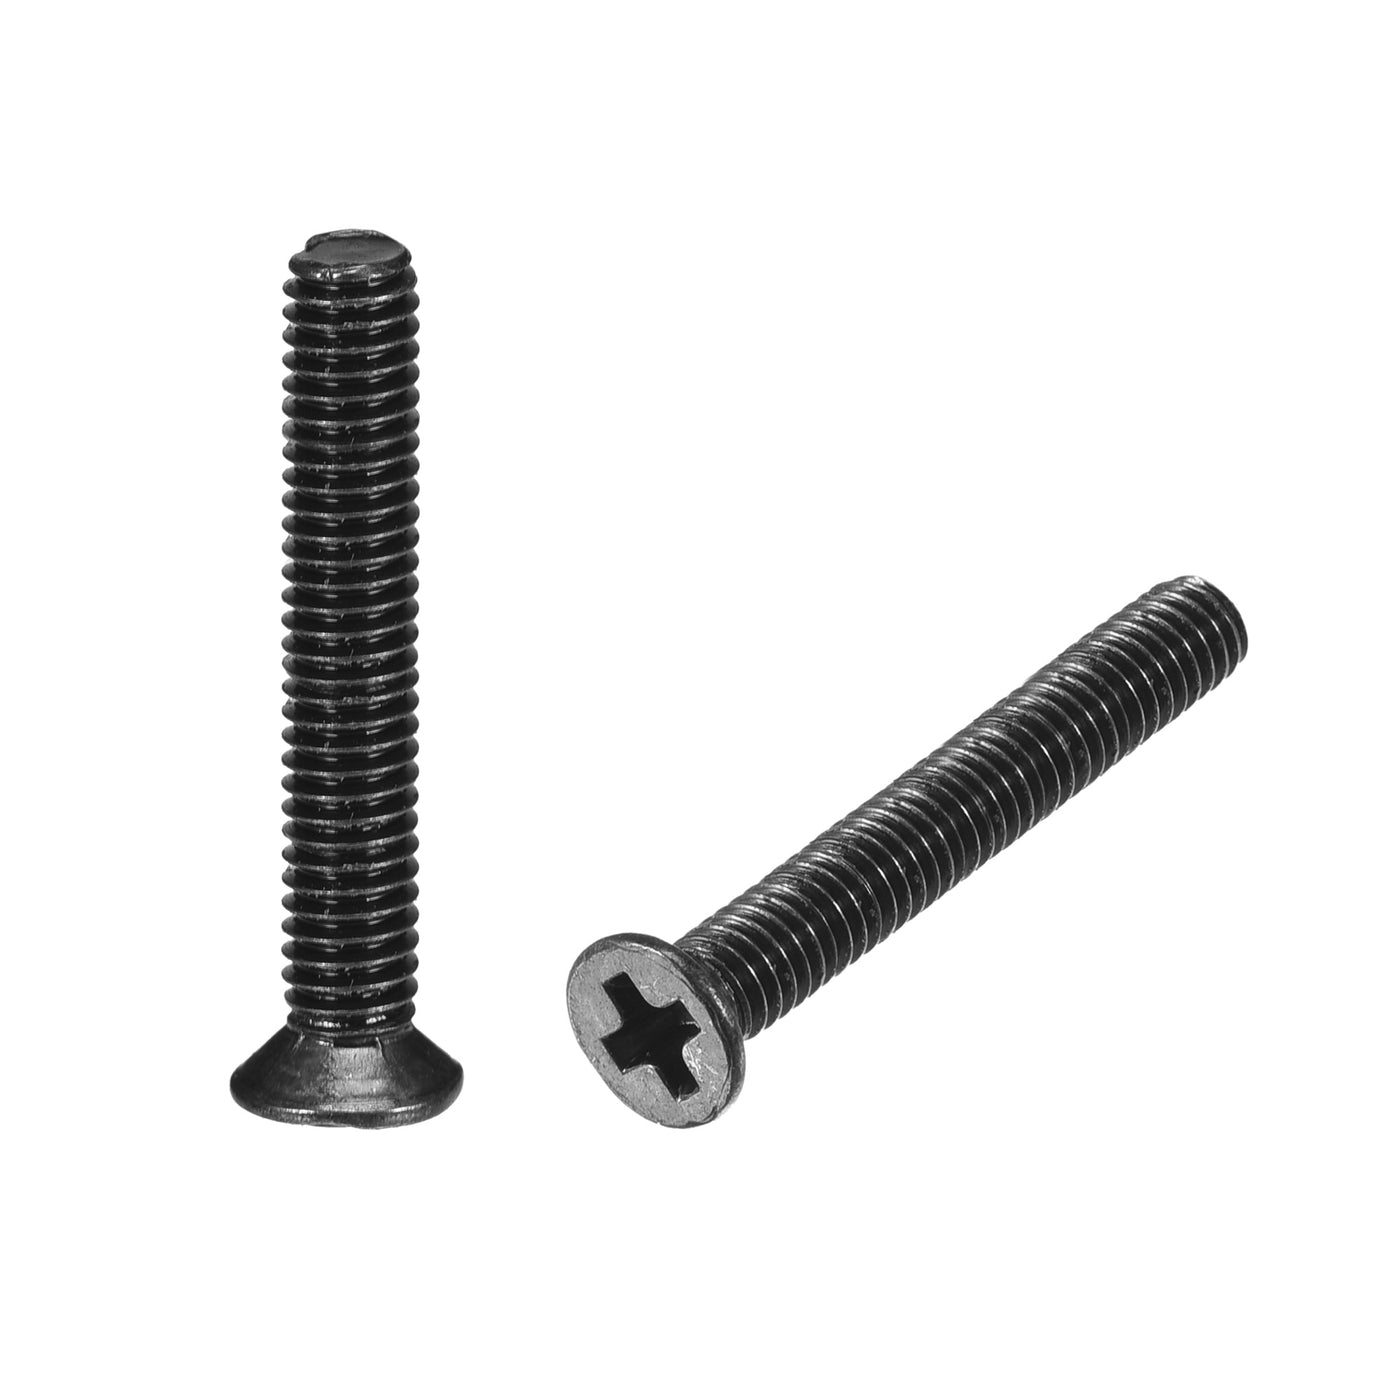 uxcell Uxcell M2.5 x 18mm Phillips Flat Head Screws Carbon Steel Machine Screws Black for Home Office Computer Case Appliance Equipment 350pcs